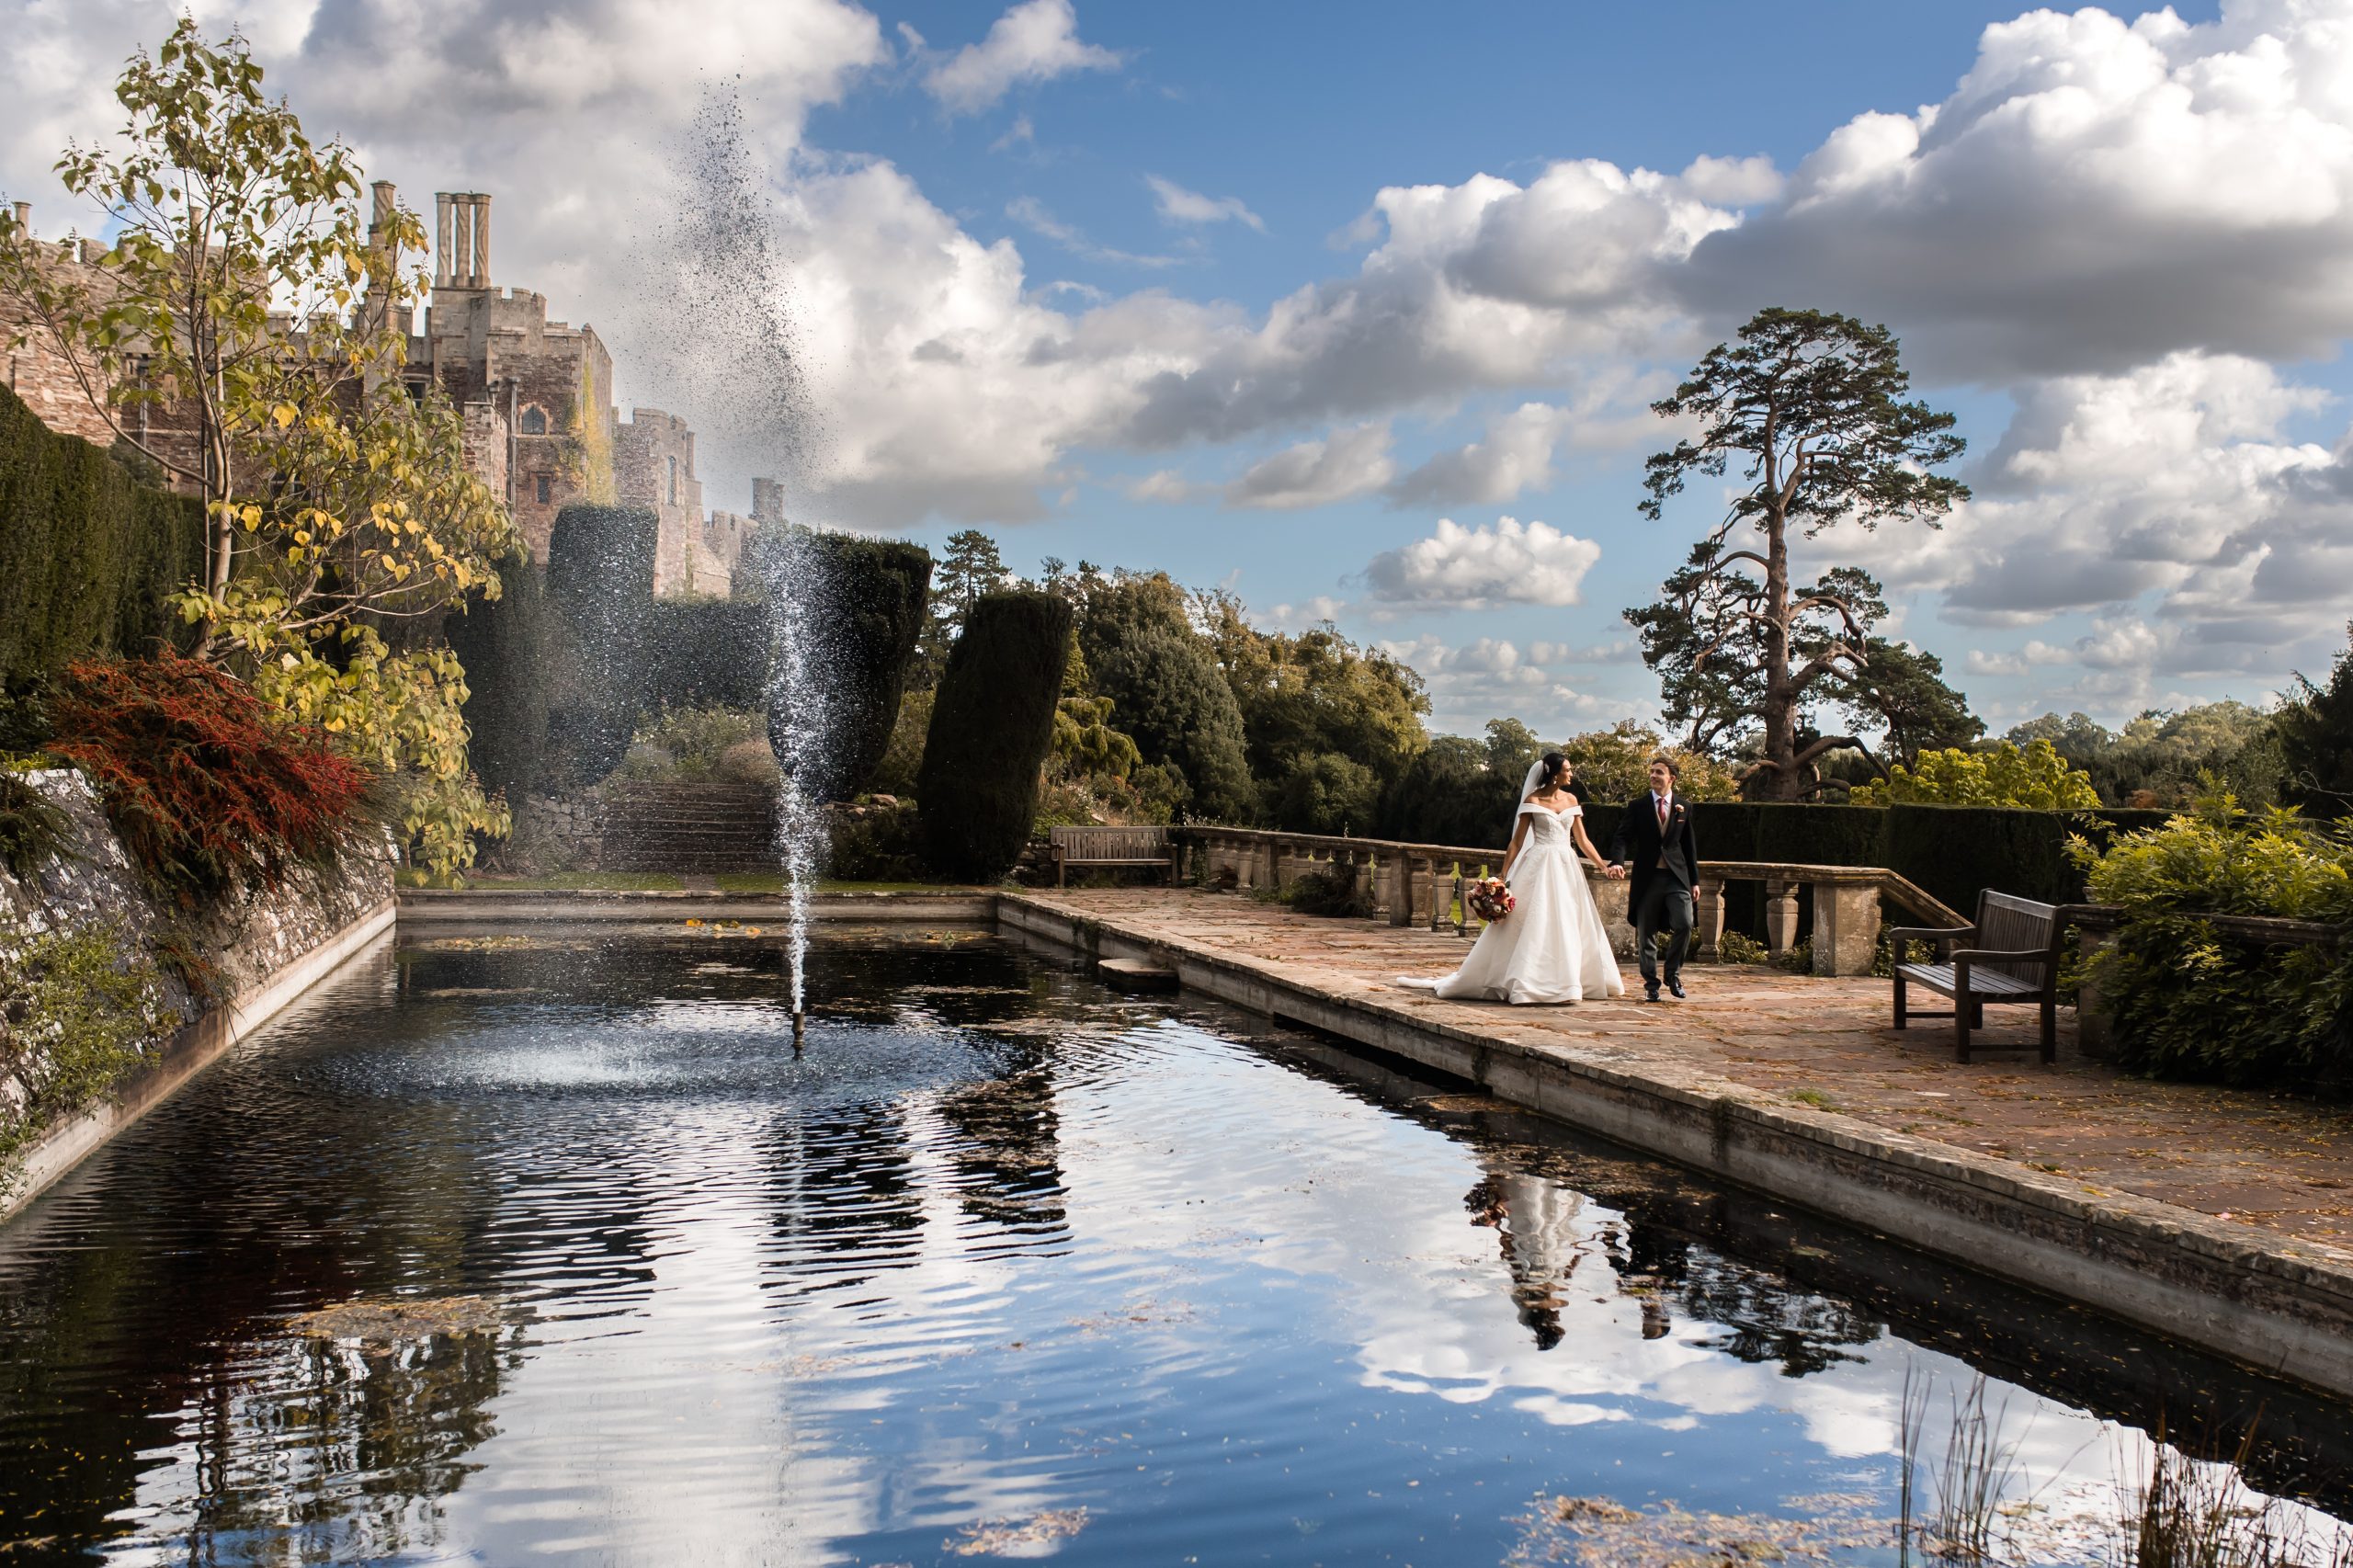 Berkeley Castle Wedding Venue…The King of the Cotwolds